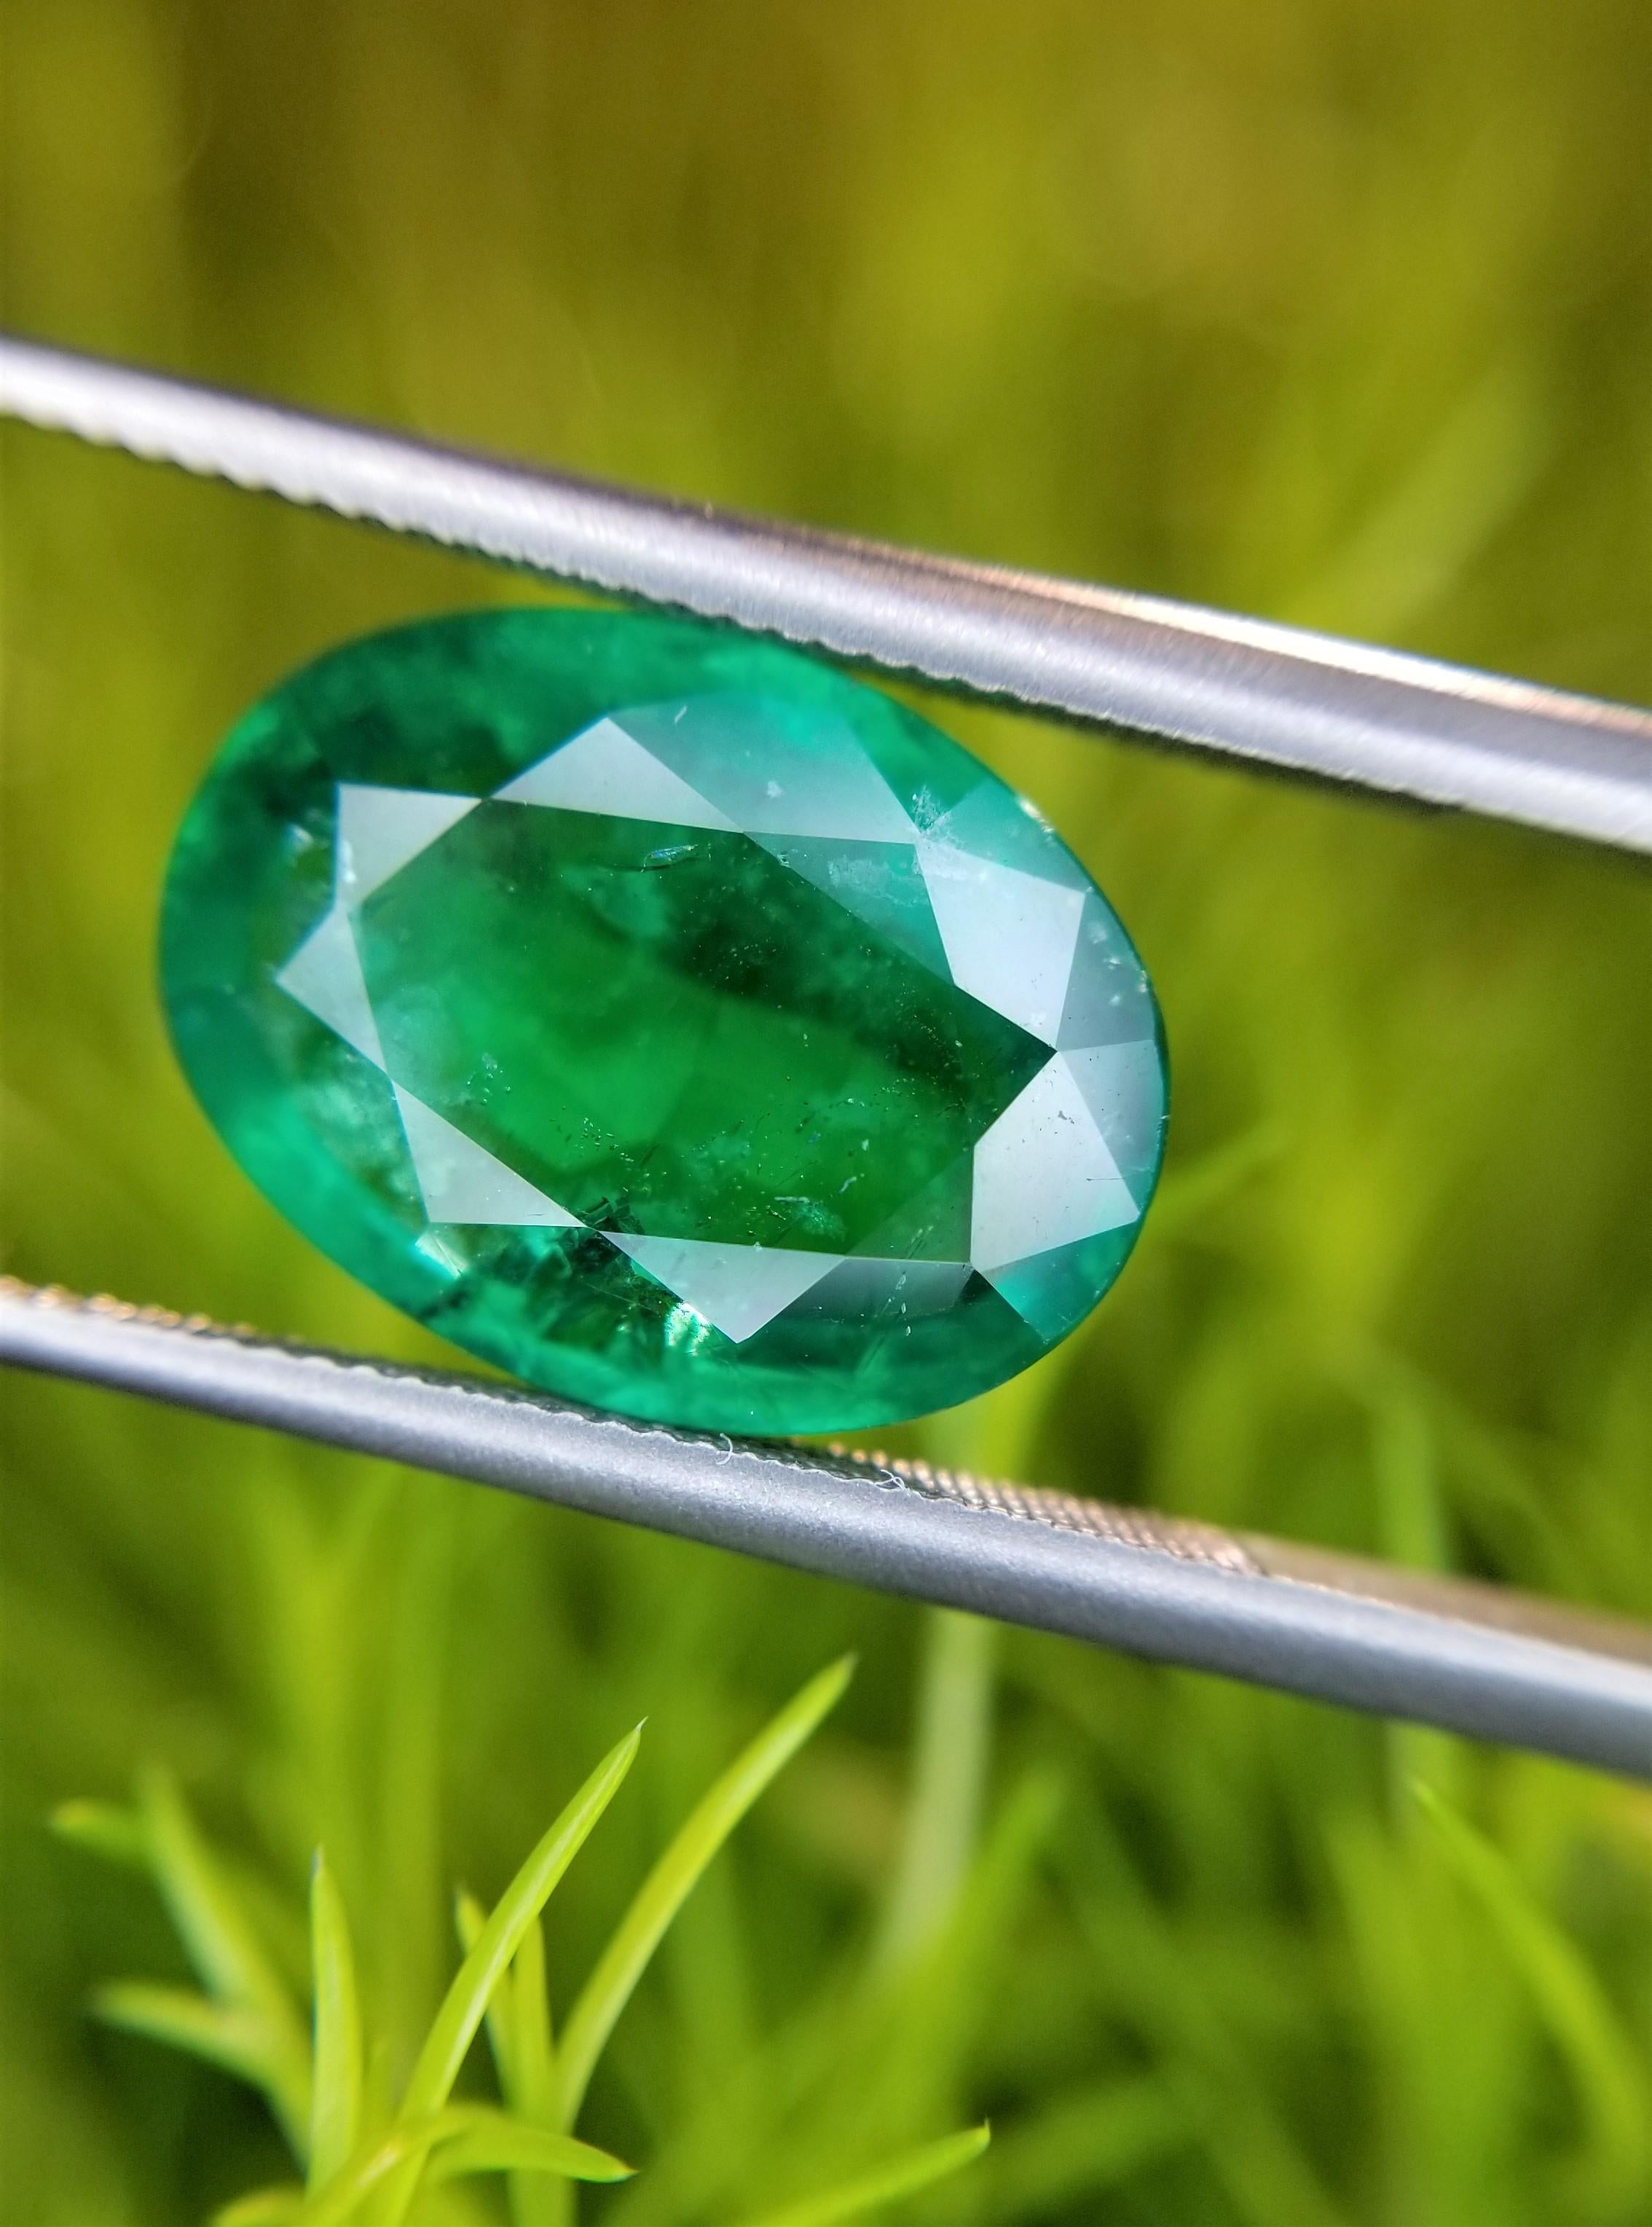 Contemporary 4.69 Ct Weight Oval Shaped Green Color IGITL Certified Emerald Gemstone Pendant For Sale